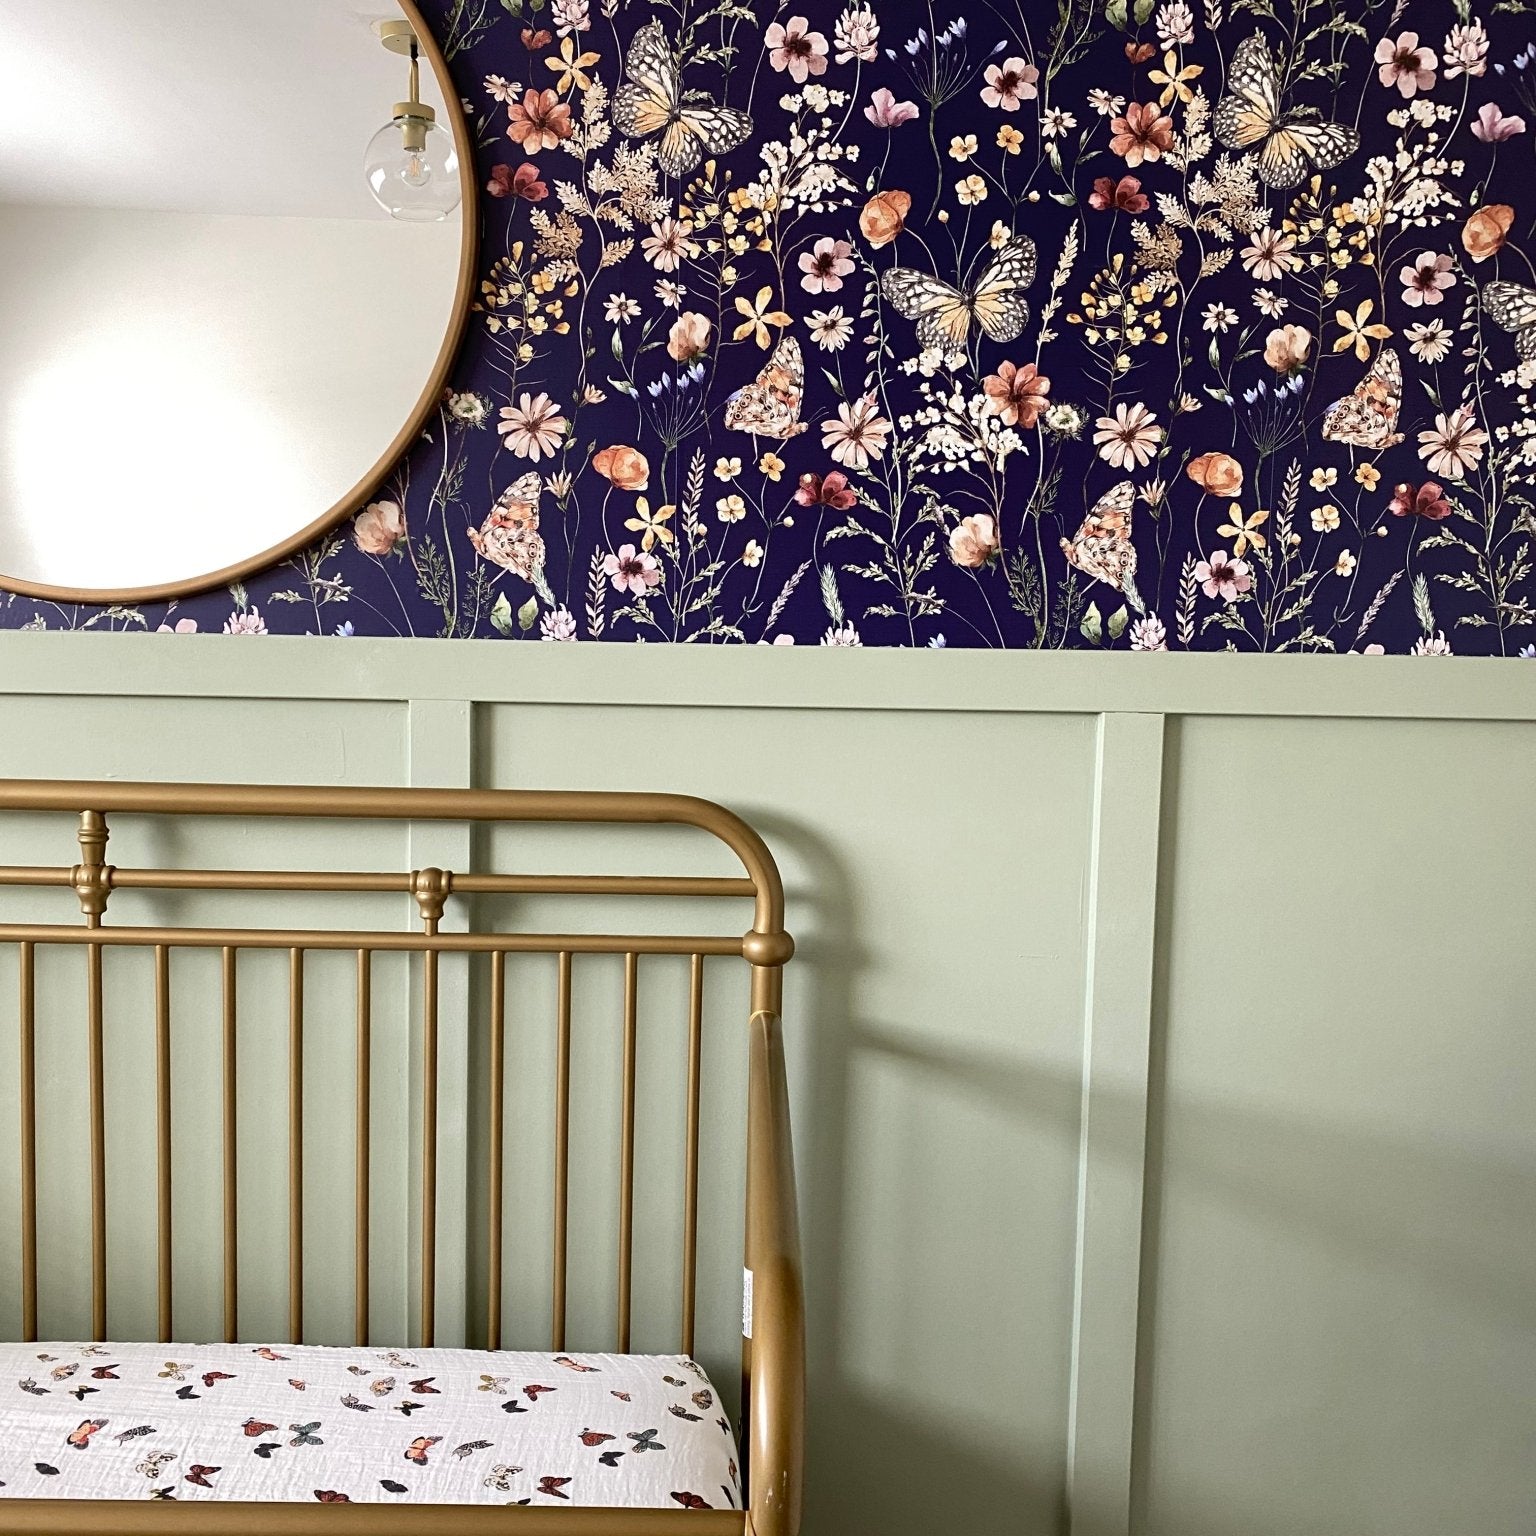 Close-up of the nursery showing the same navy blue butterfly-themed wallpaper and the top of a brass crib against a green half-wall